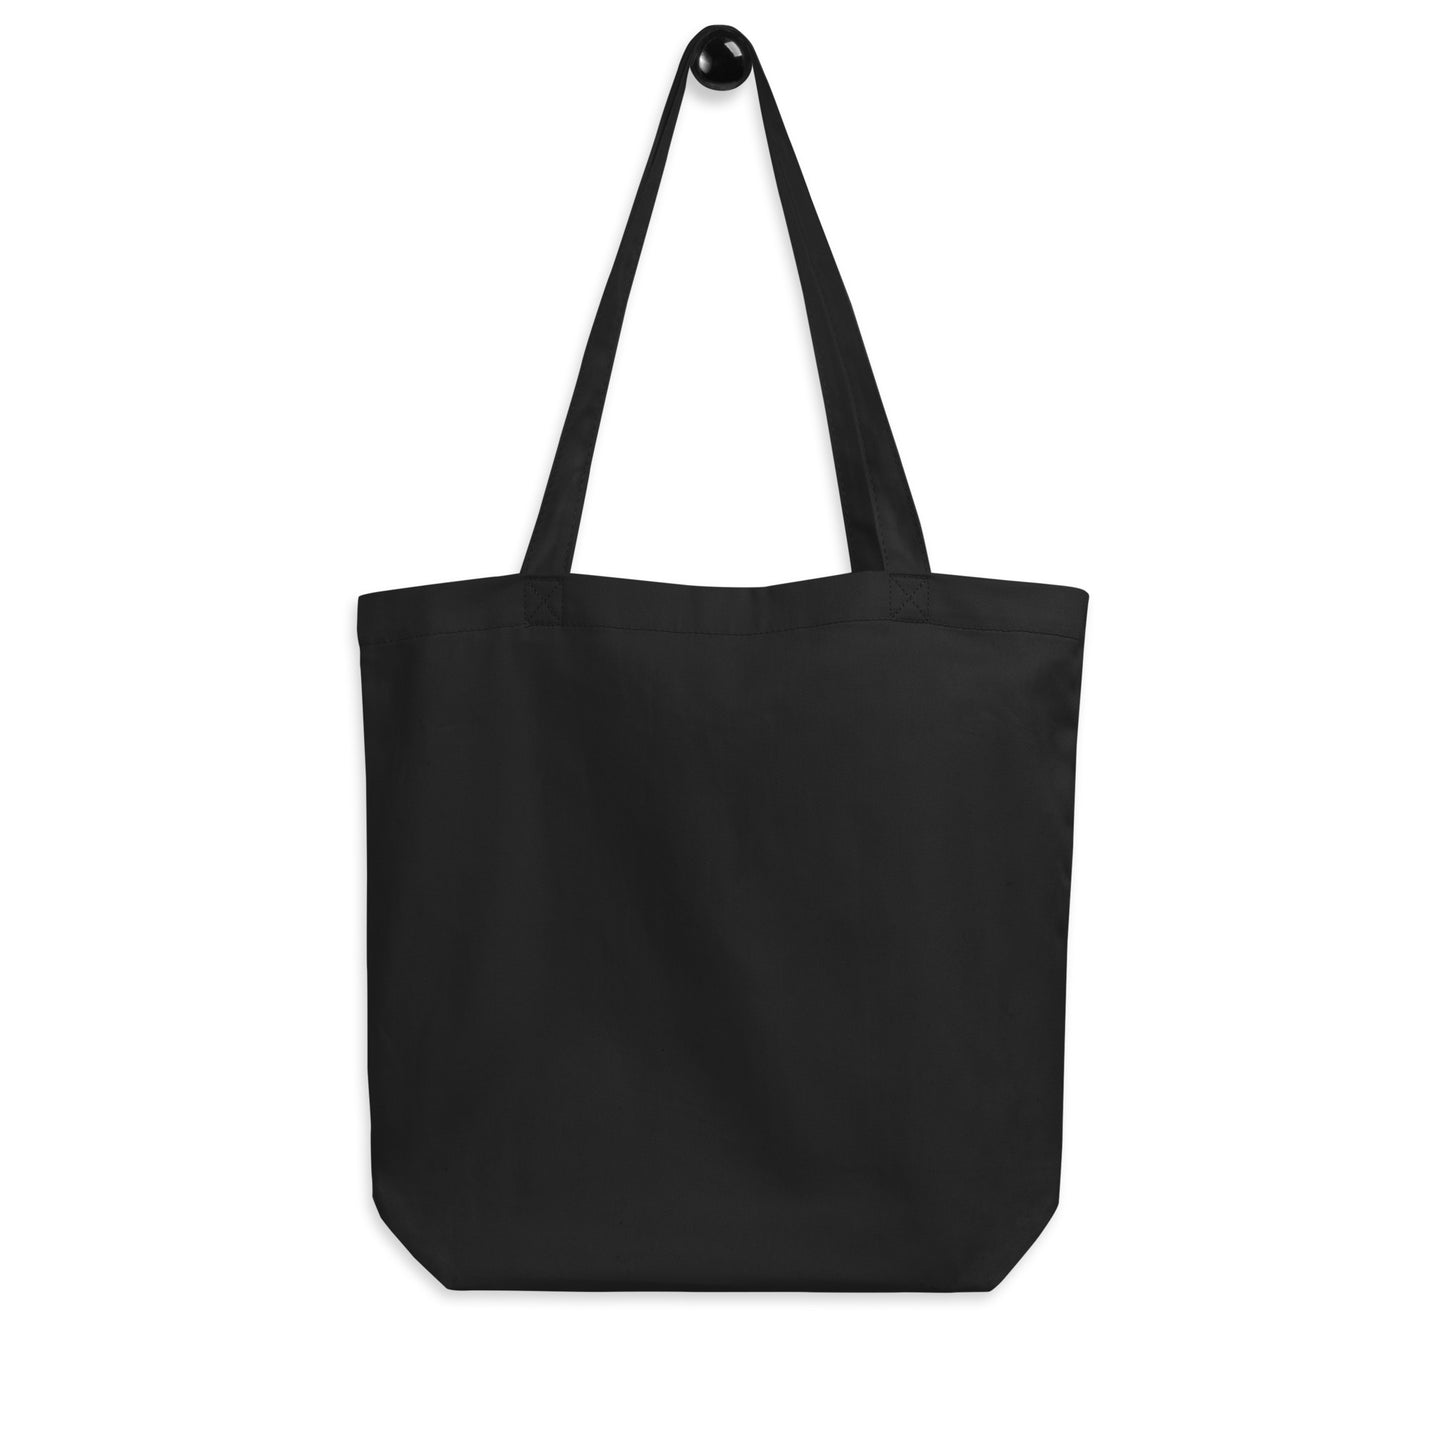 Unique Travel Gift Organic Tote - White Oval • AKL Auckland • YHM Designs - Image 05